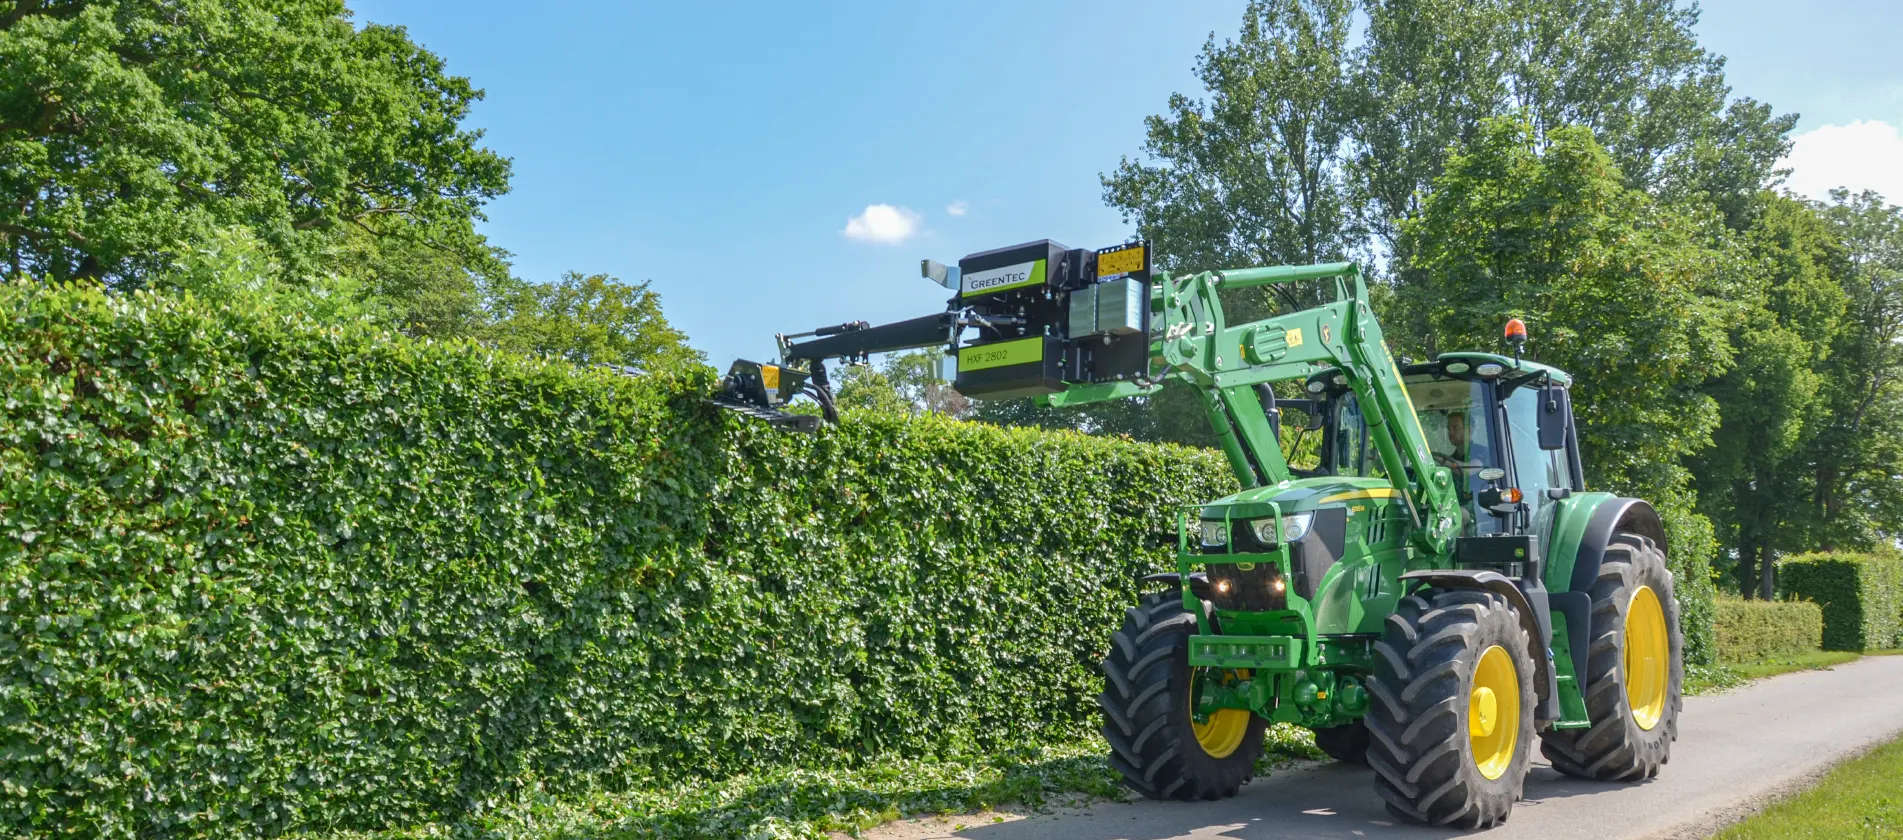 Hedge trimming with attachment frame mounted on front end loader